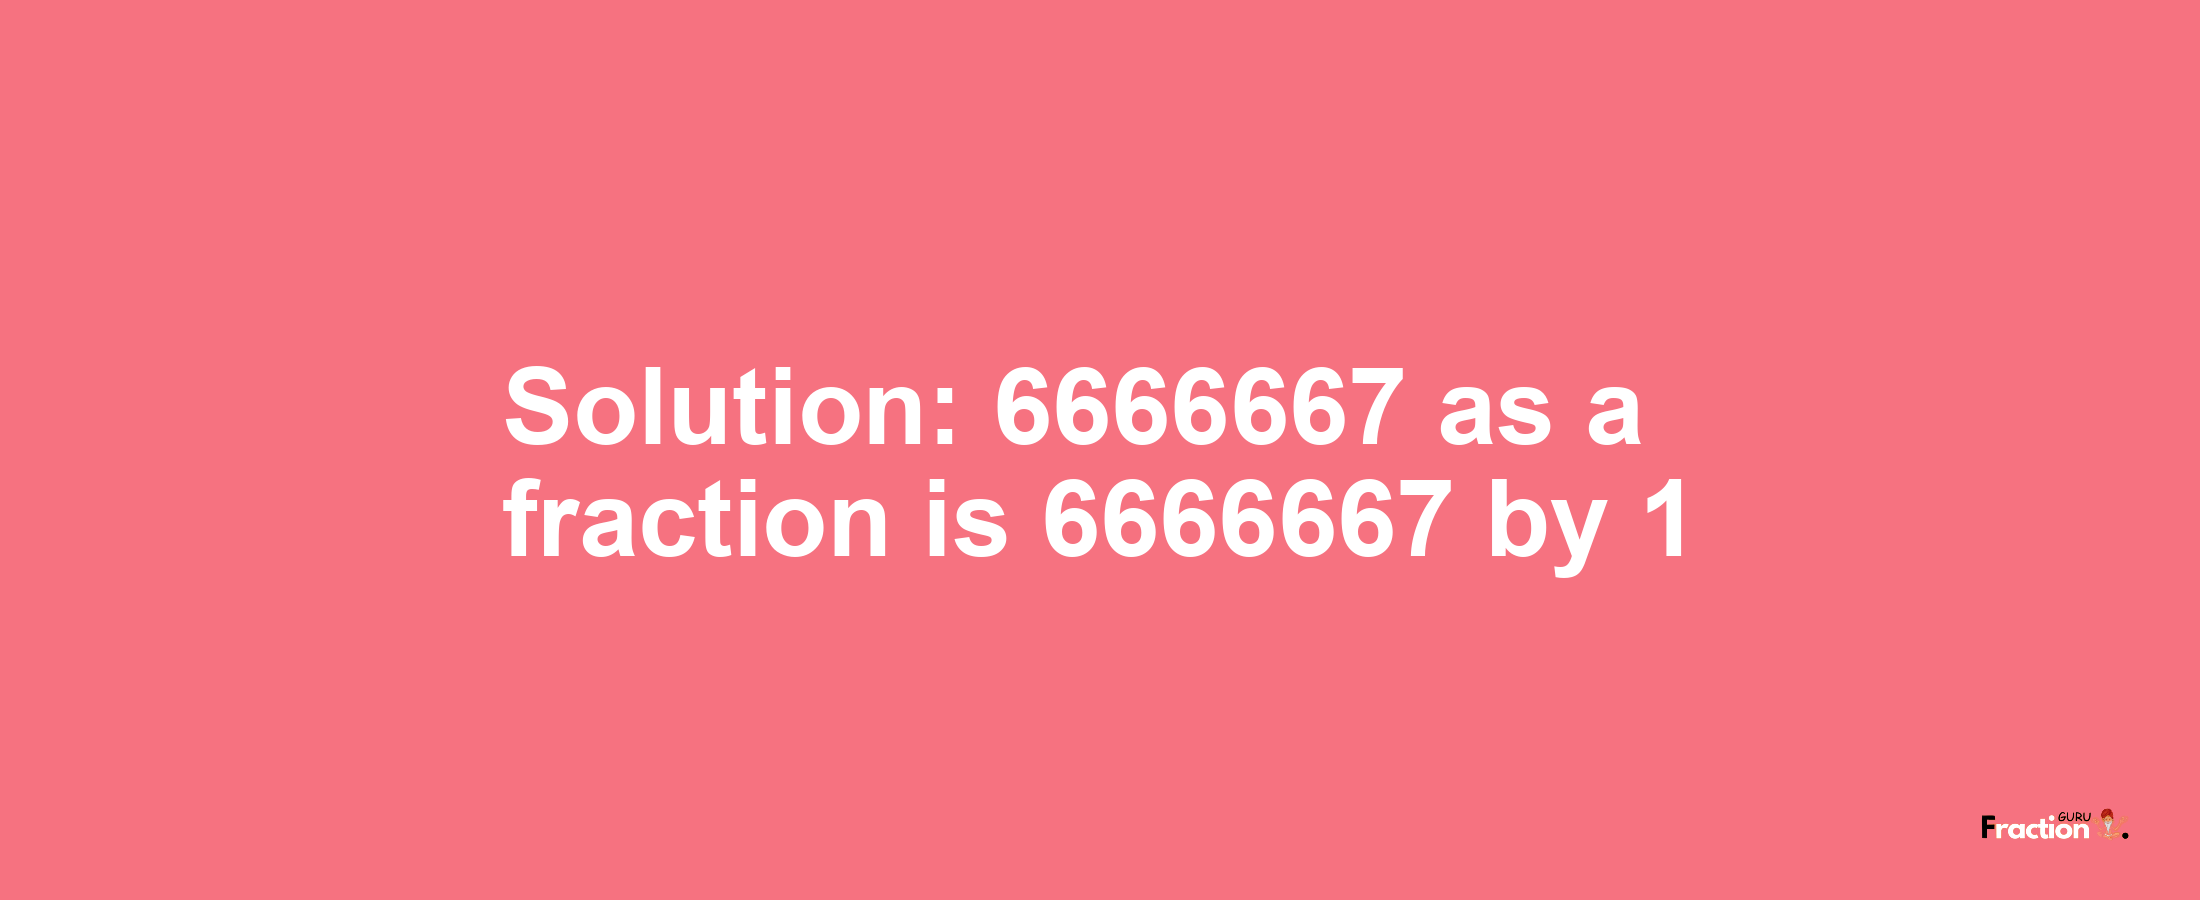 Solution:6666667 as a fraction is 6666667/1